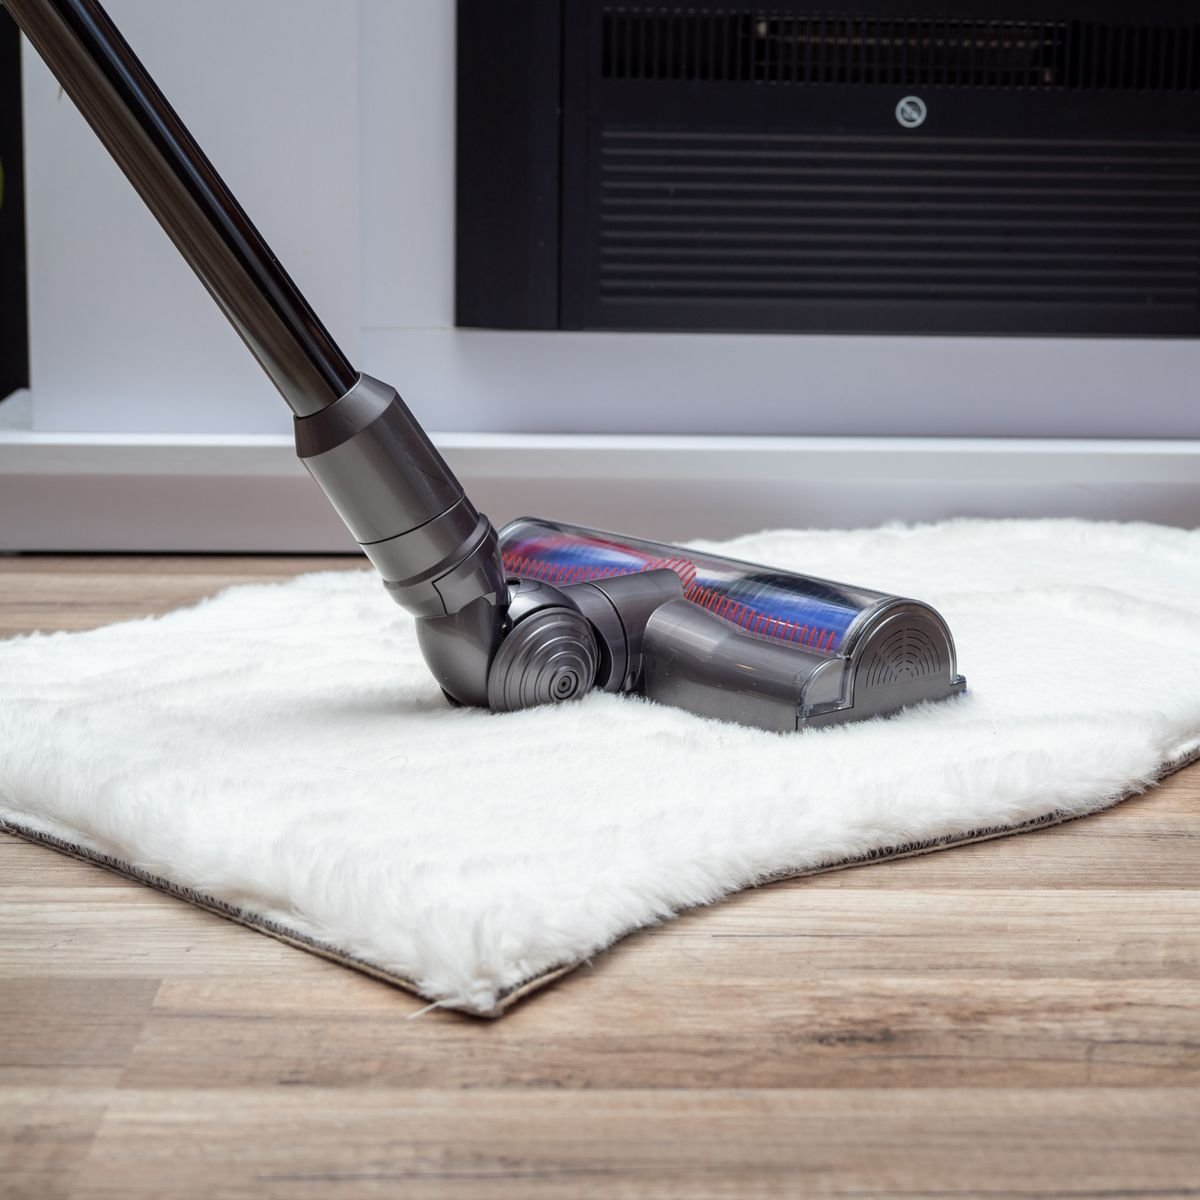 Are cordless vacuum cleaners worth it? Our honest opinion so you don't waste money on Black Friday